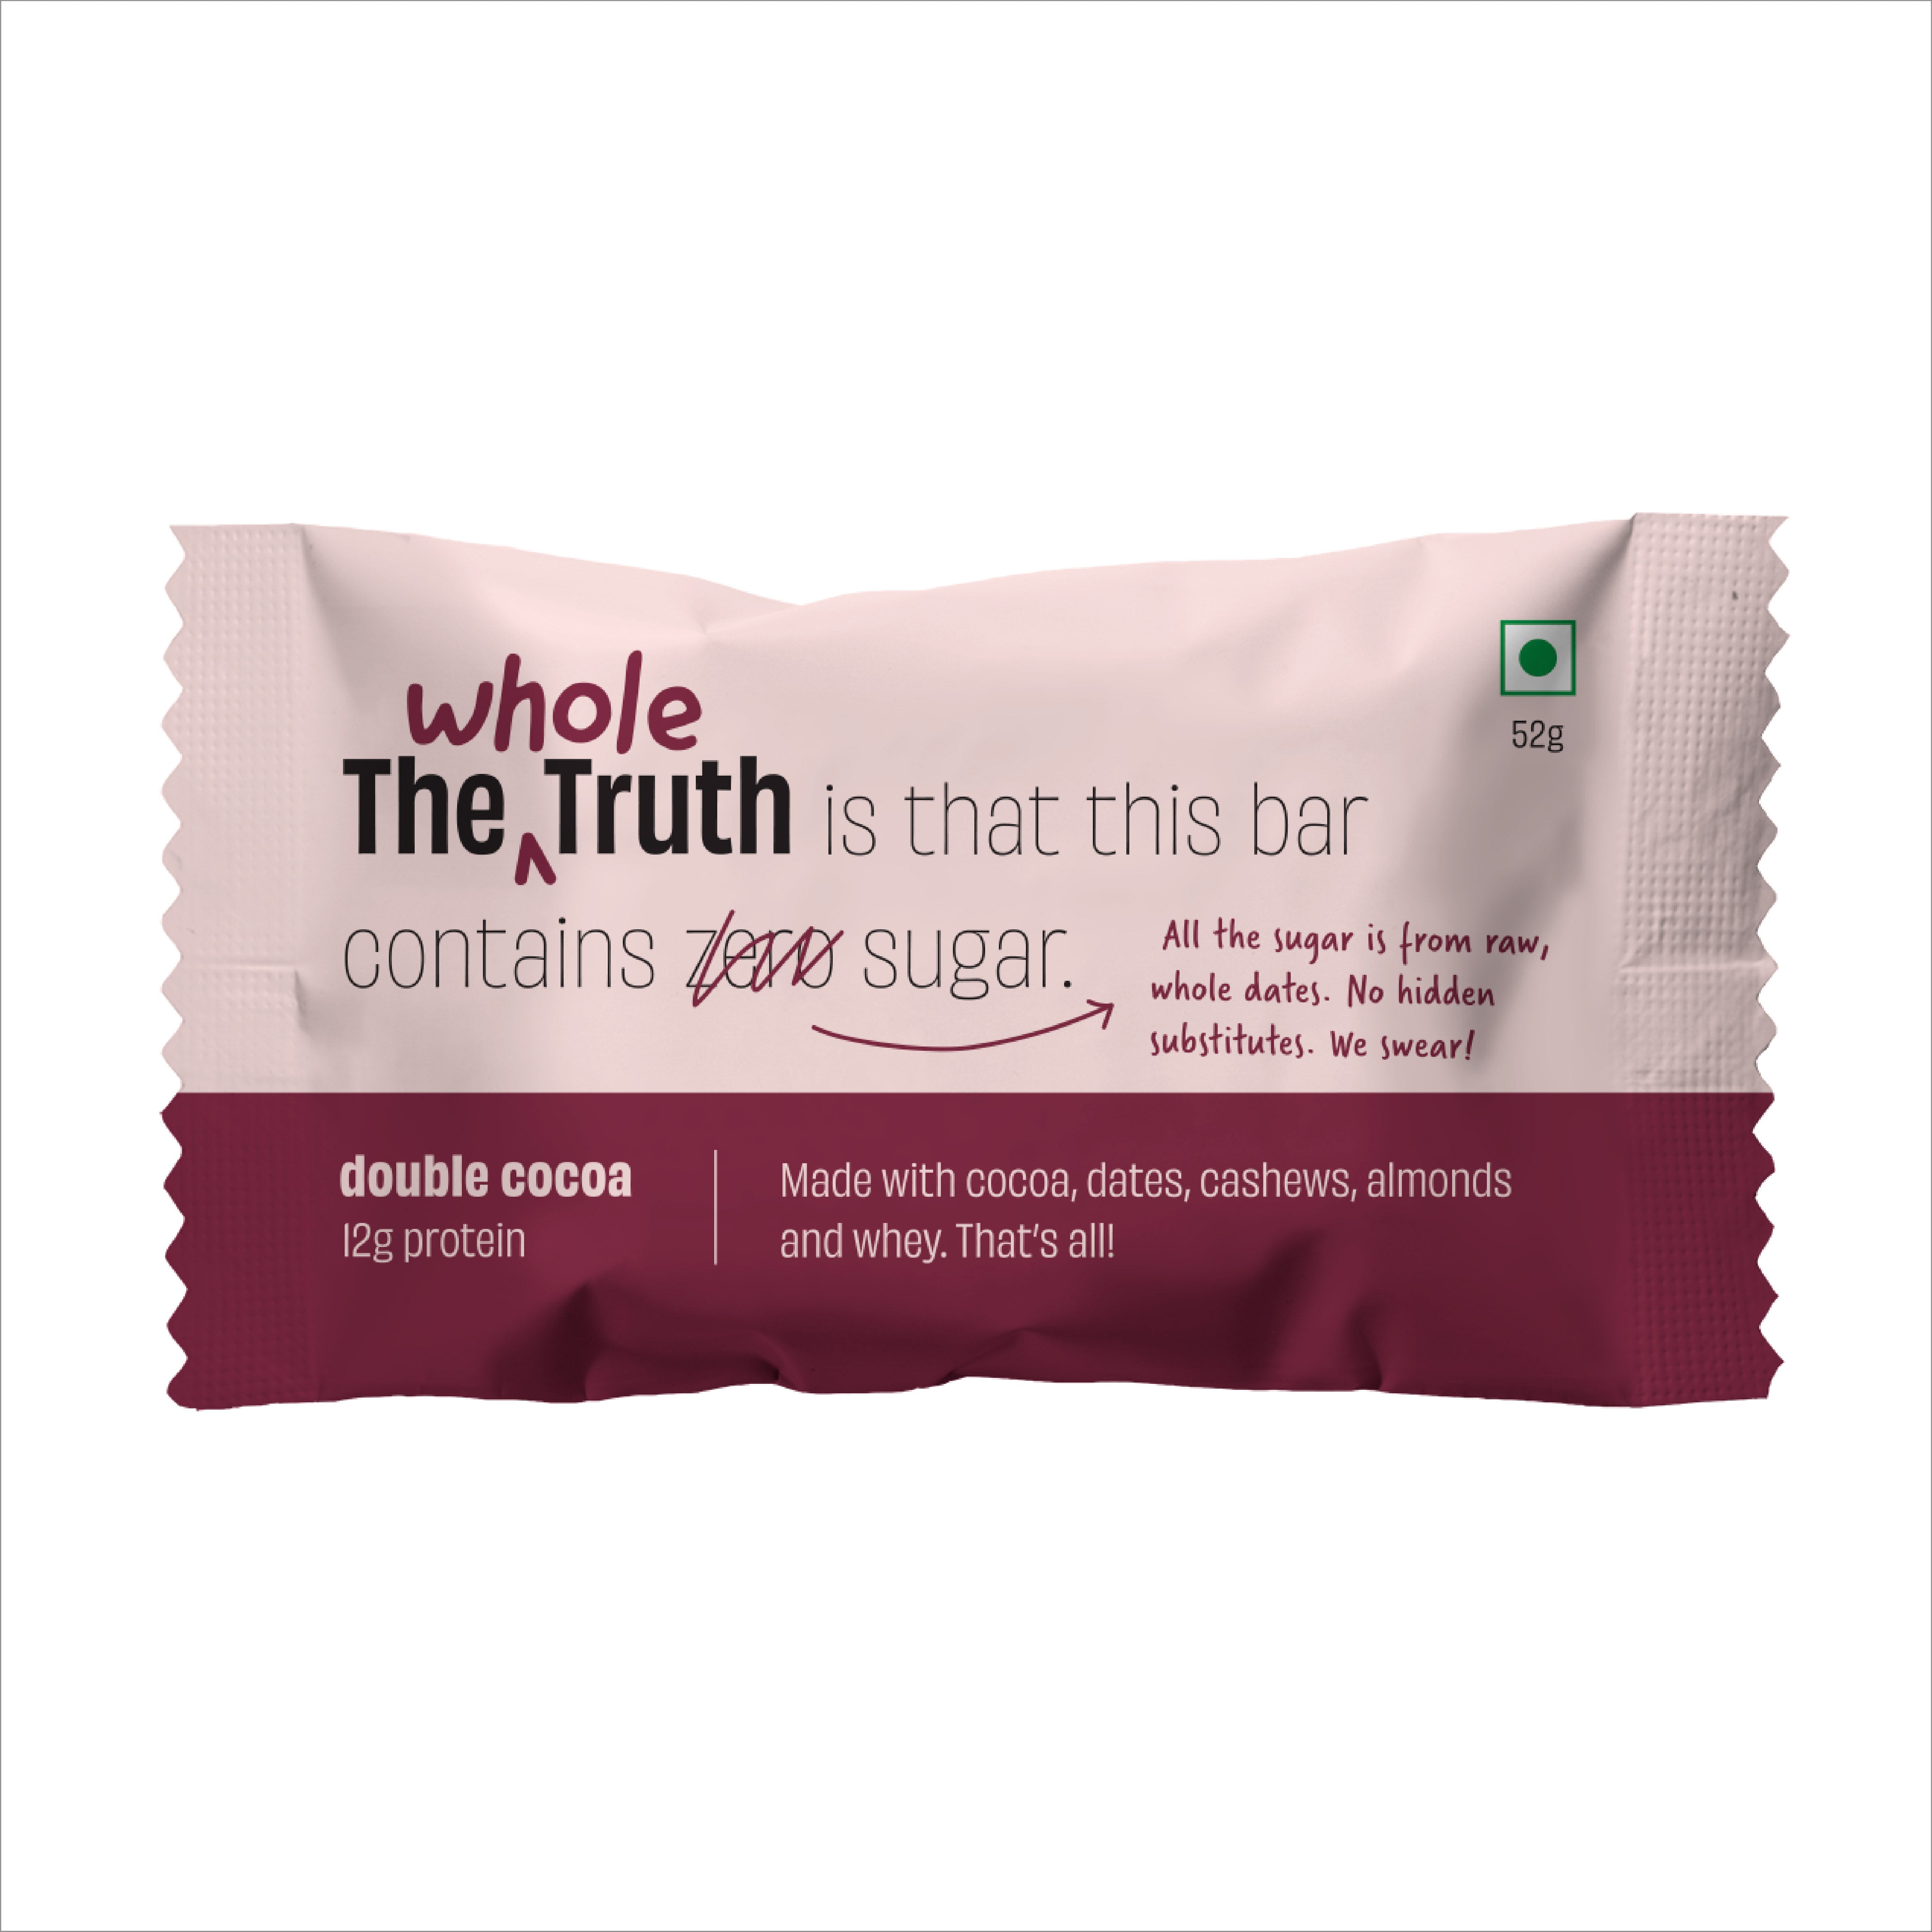 The Whole Truth - Protein Bars - Double Cocoa - Pack of 6 (6 x 52g) - No Added Sugar - All Natural